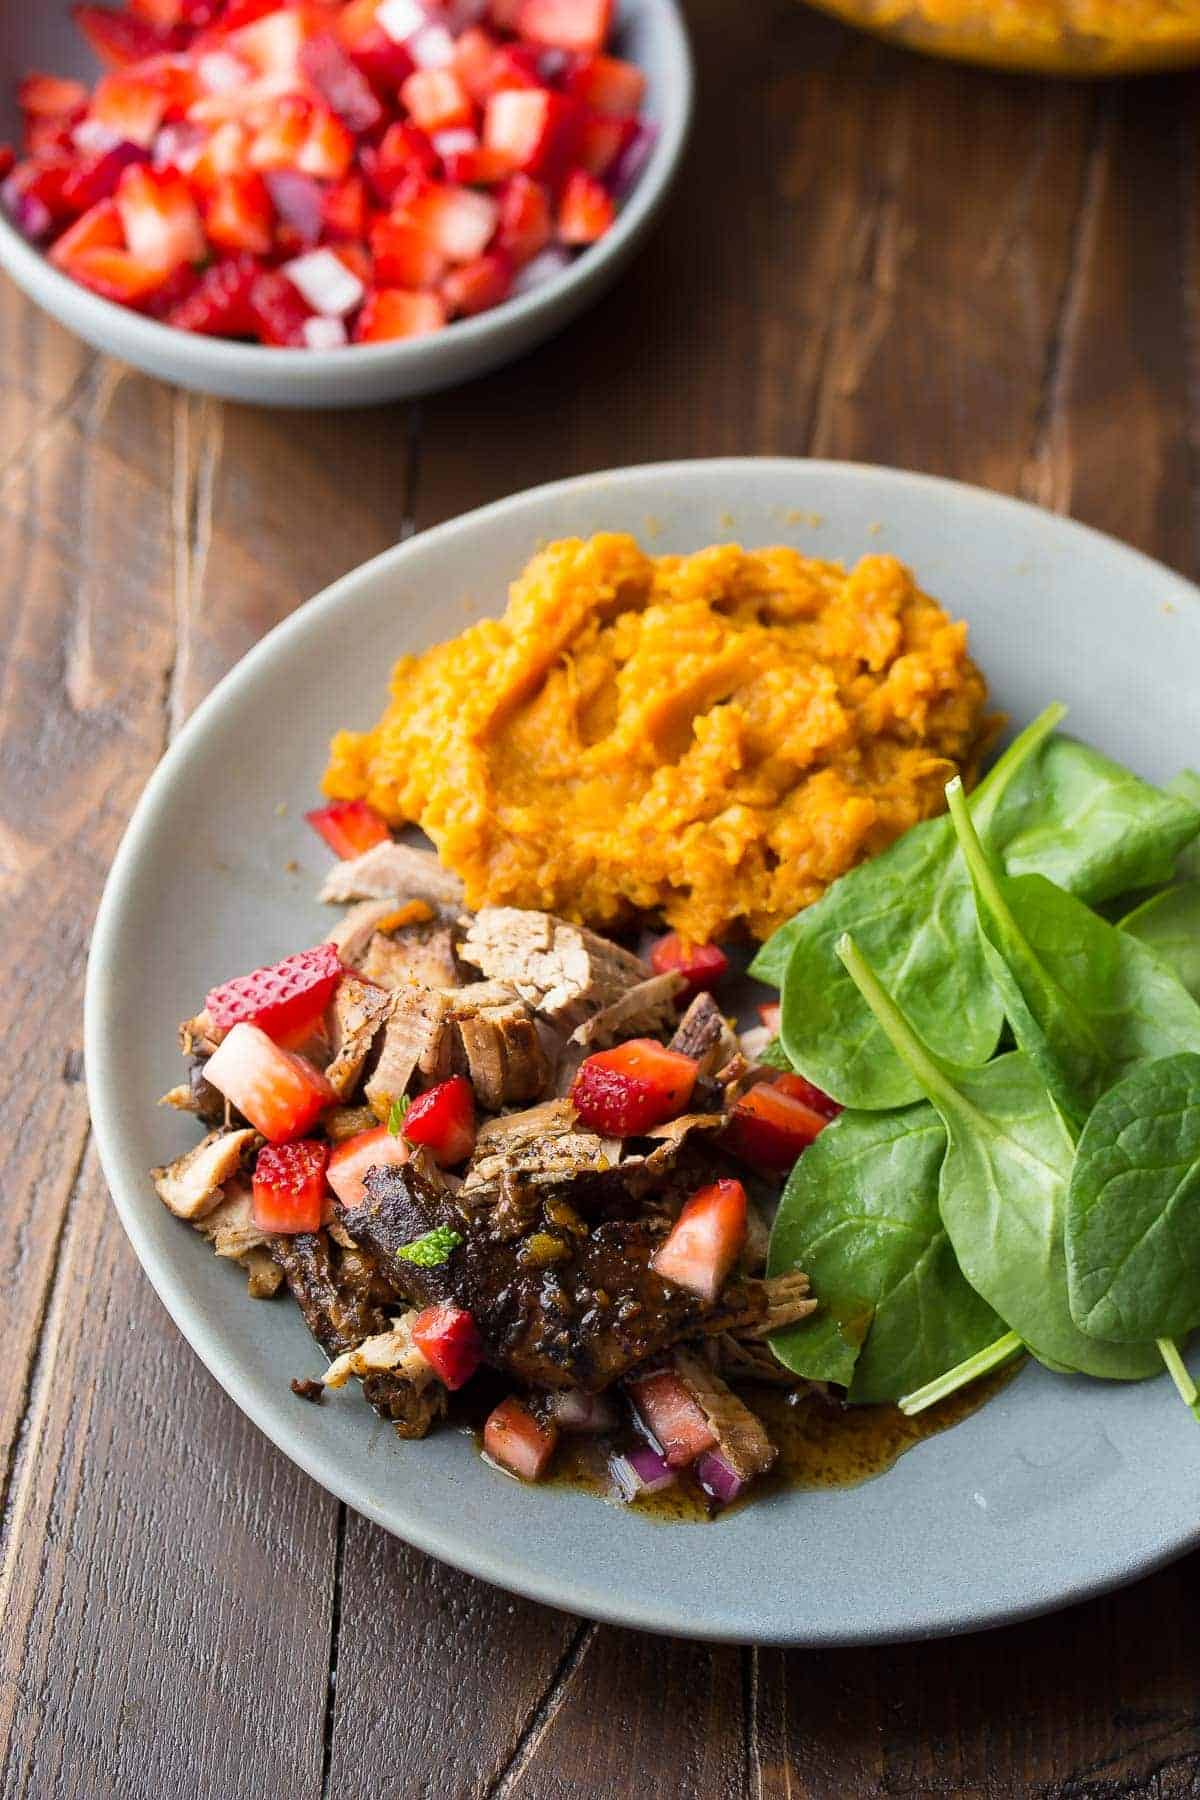 This slow cooker pork tenderloin is cooked in a tangy balsamic sauce with sweet potatoes, then topped with a fresh strawberry salsa